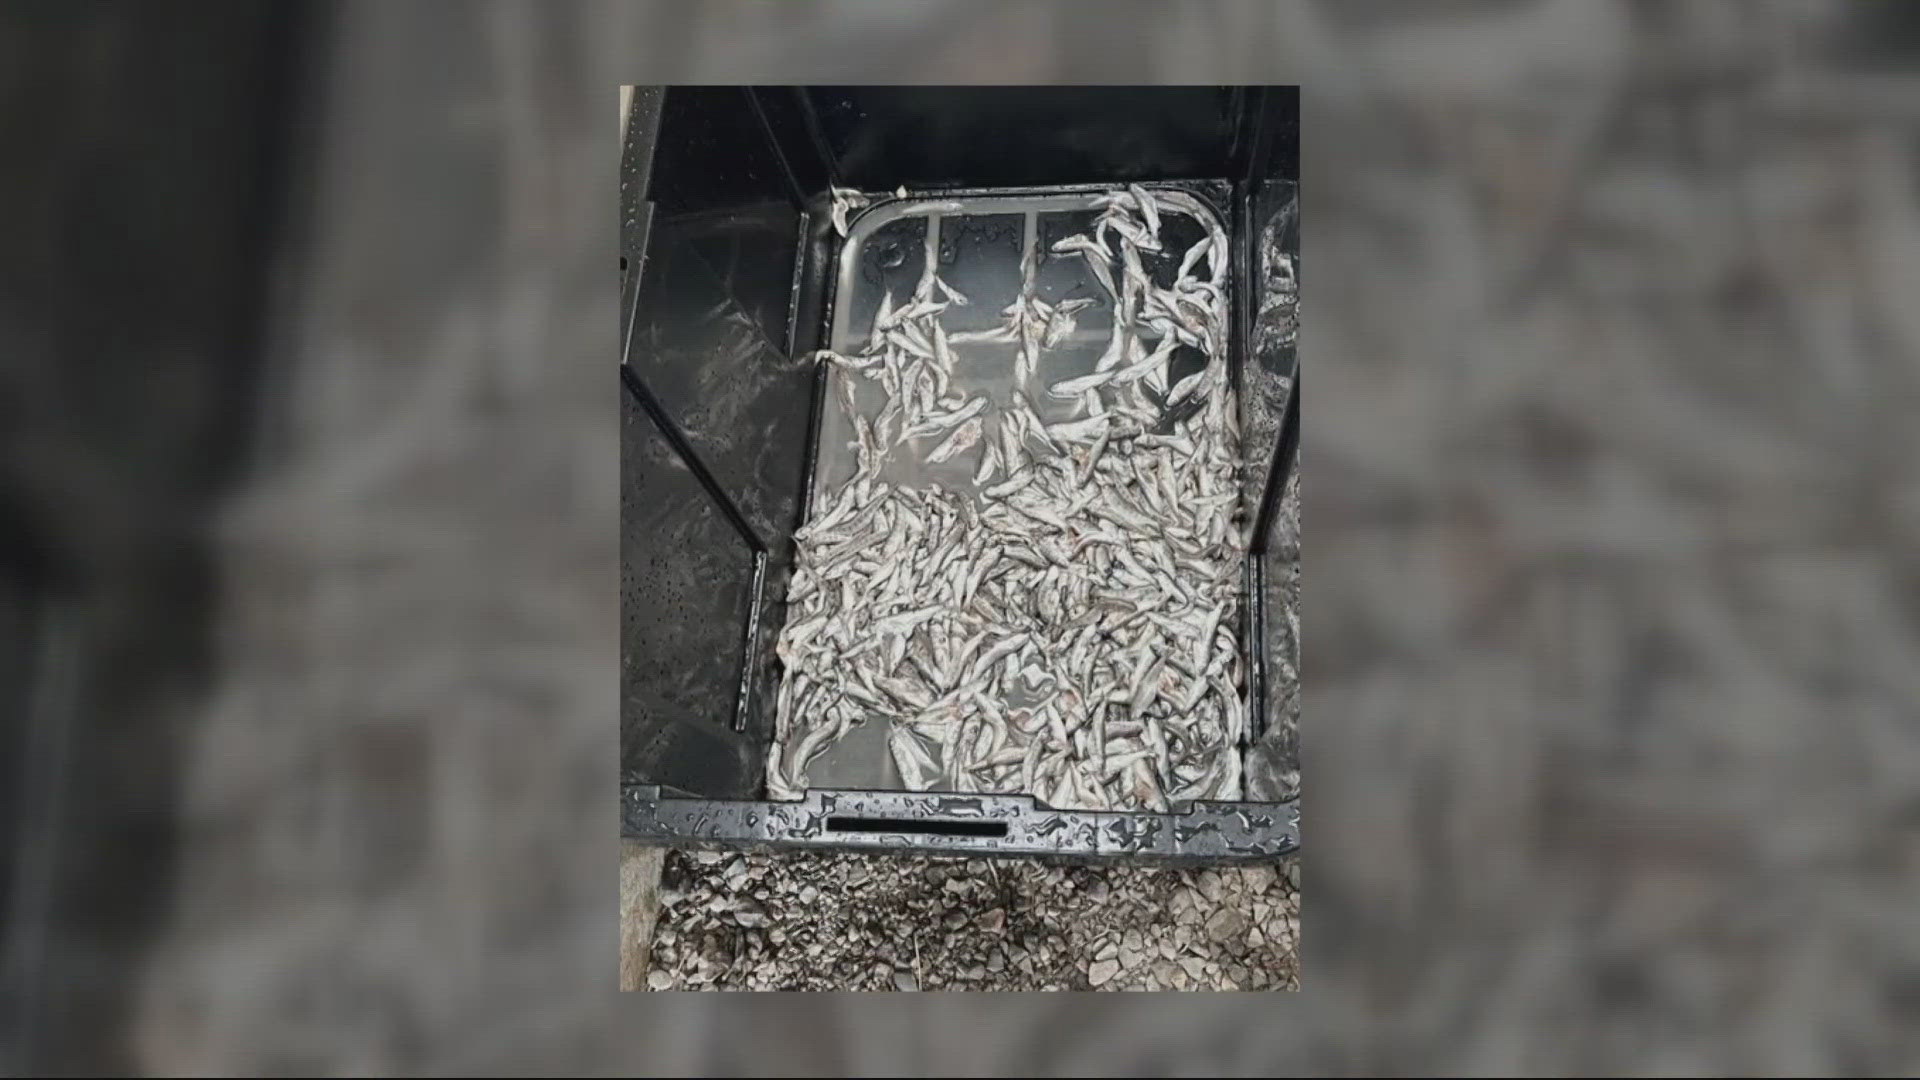 Court documents said on May 20, the 20-year-old trespassed onto the fish hatchery, took a bottle of bleach from a storage shed and poured it into a pond.